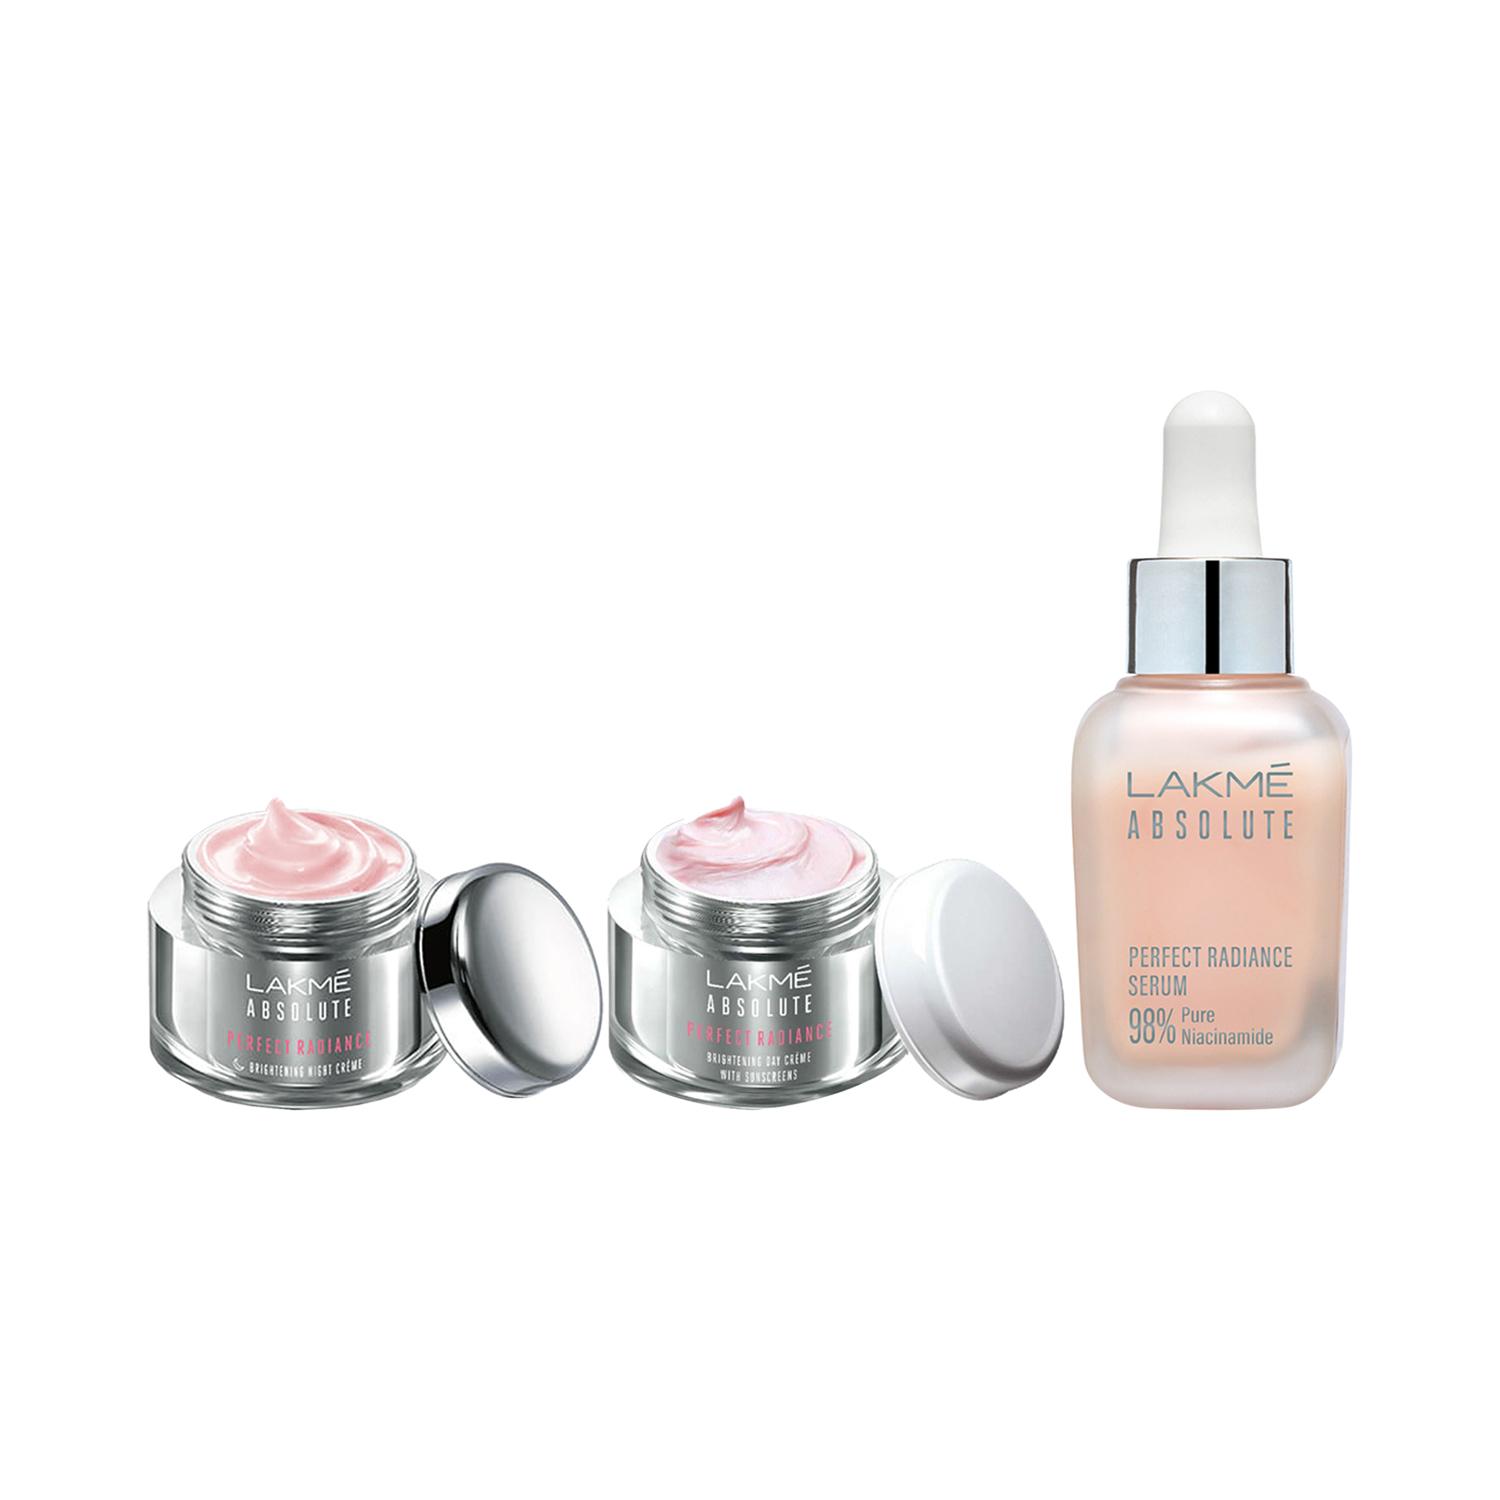 Lakme | Lakme Absolute Perfect Radiance AM PM Routine Combo